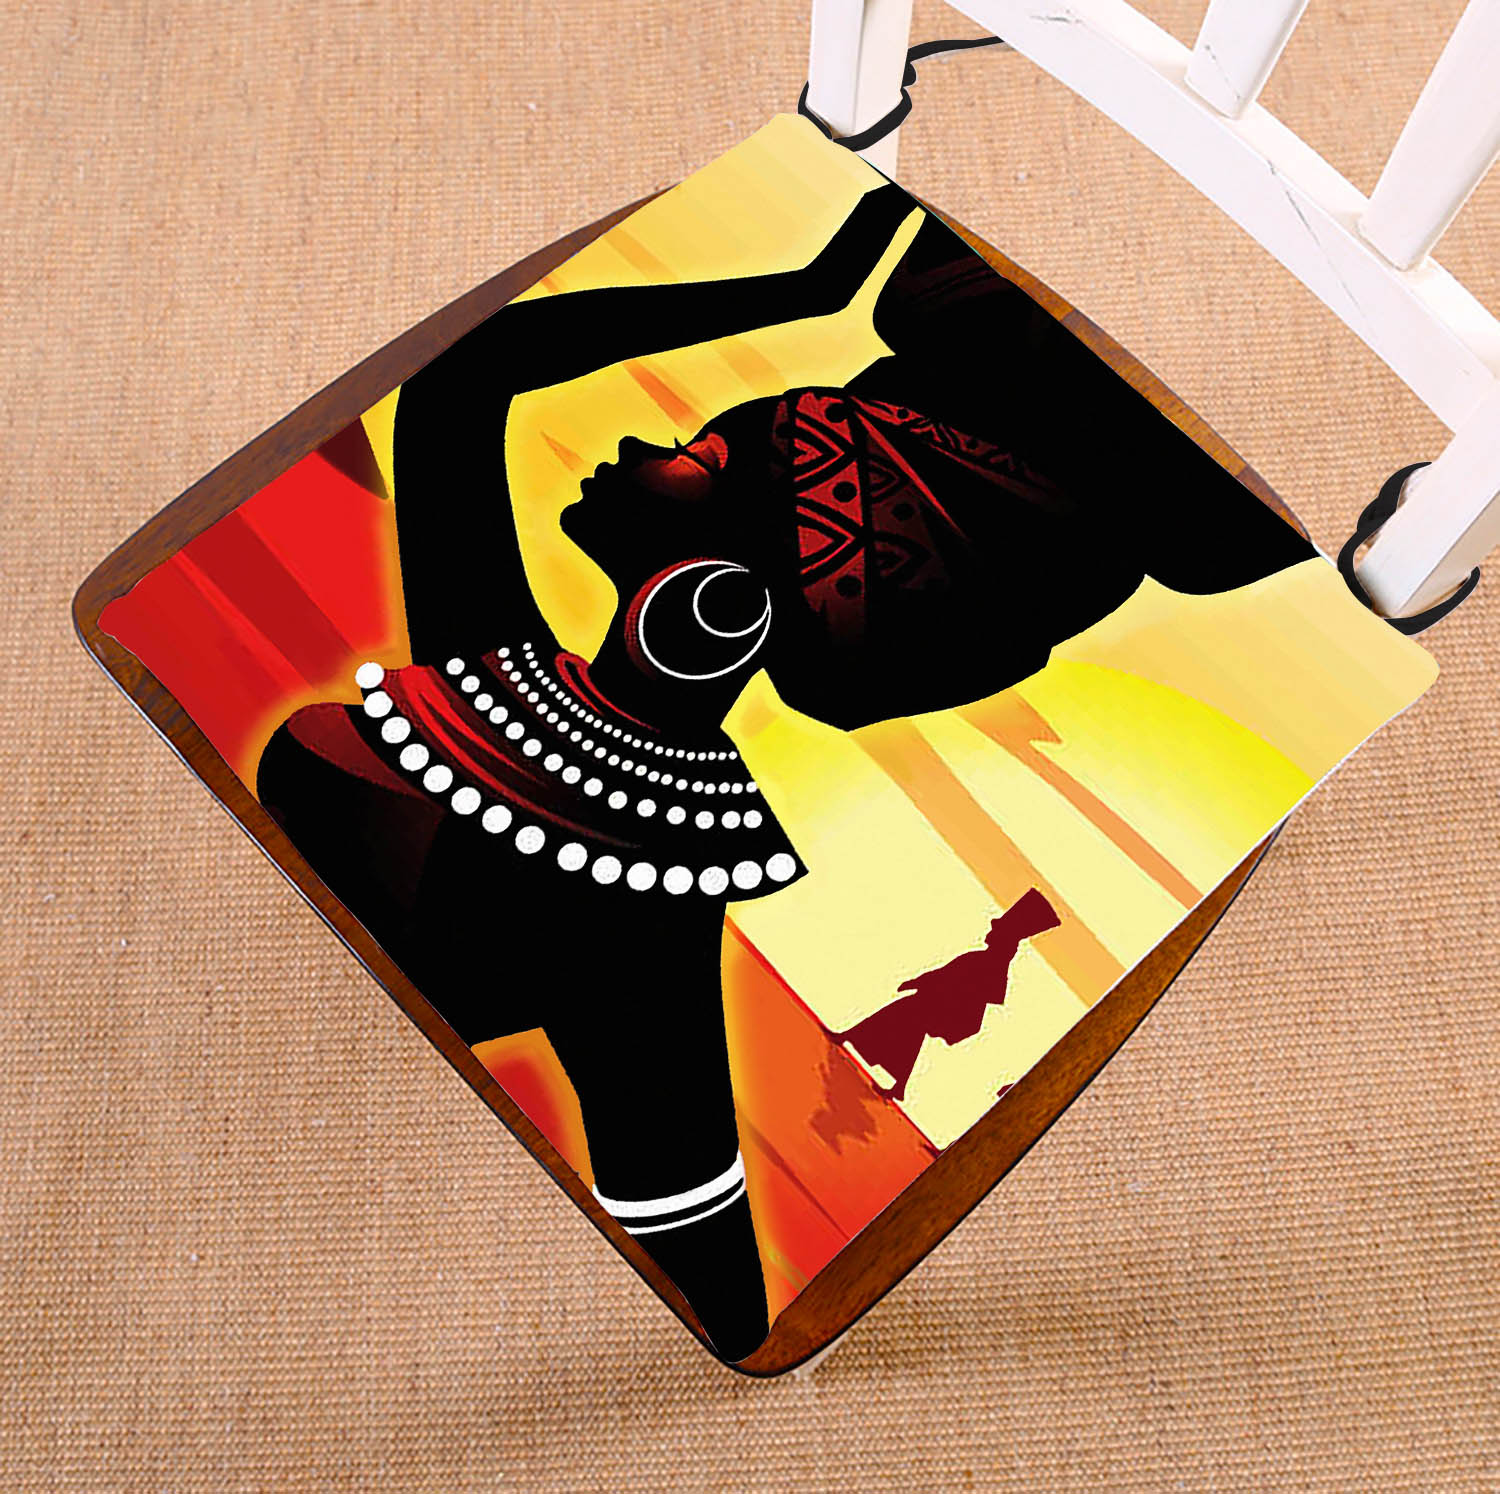 GCKG African Woman Chair Cushion,African Woman Chair Pad Seat Cushion Chair Cushion Floor Cushion with Breathable Memory Inner Cushion and Ties Two Sides Printing 16x16 inch - image 1 of 3